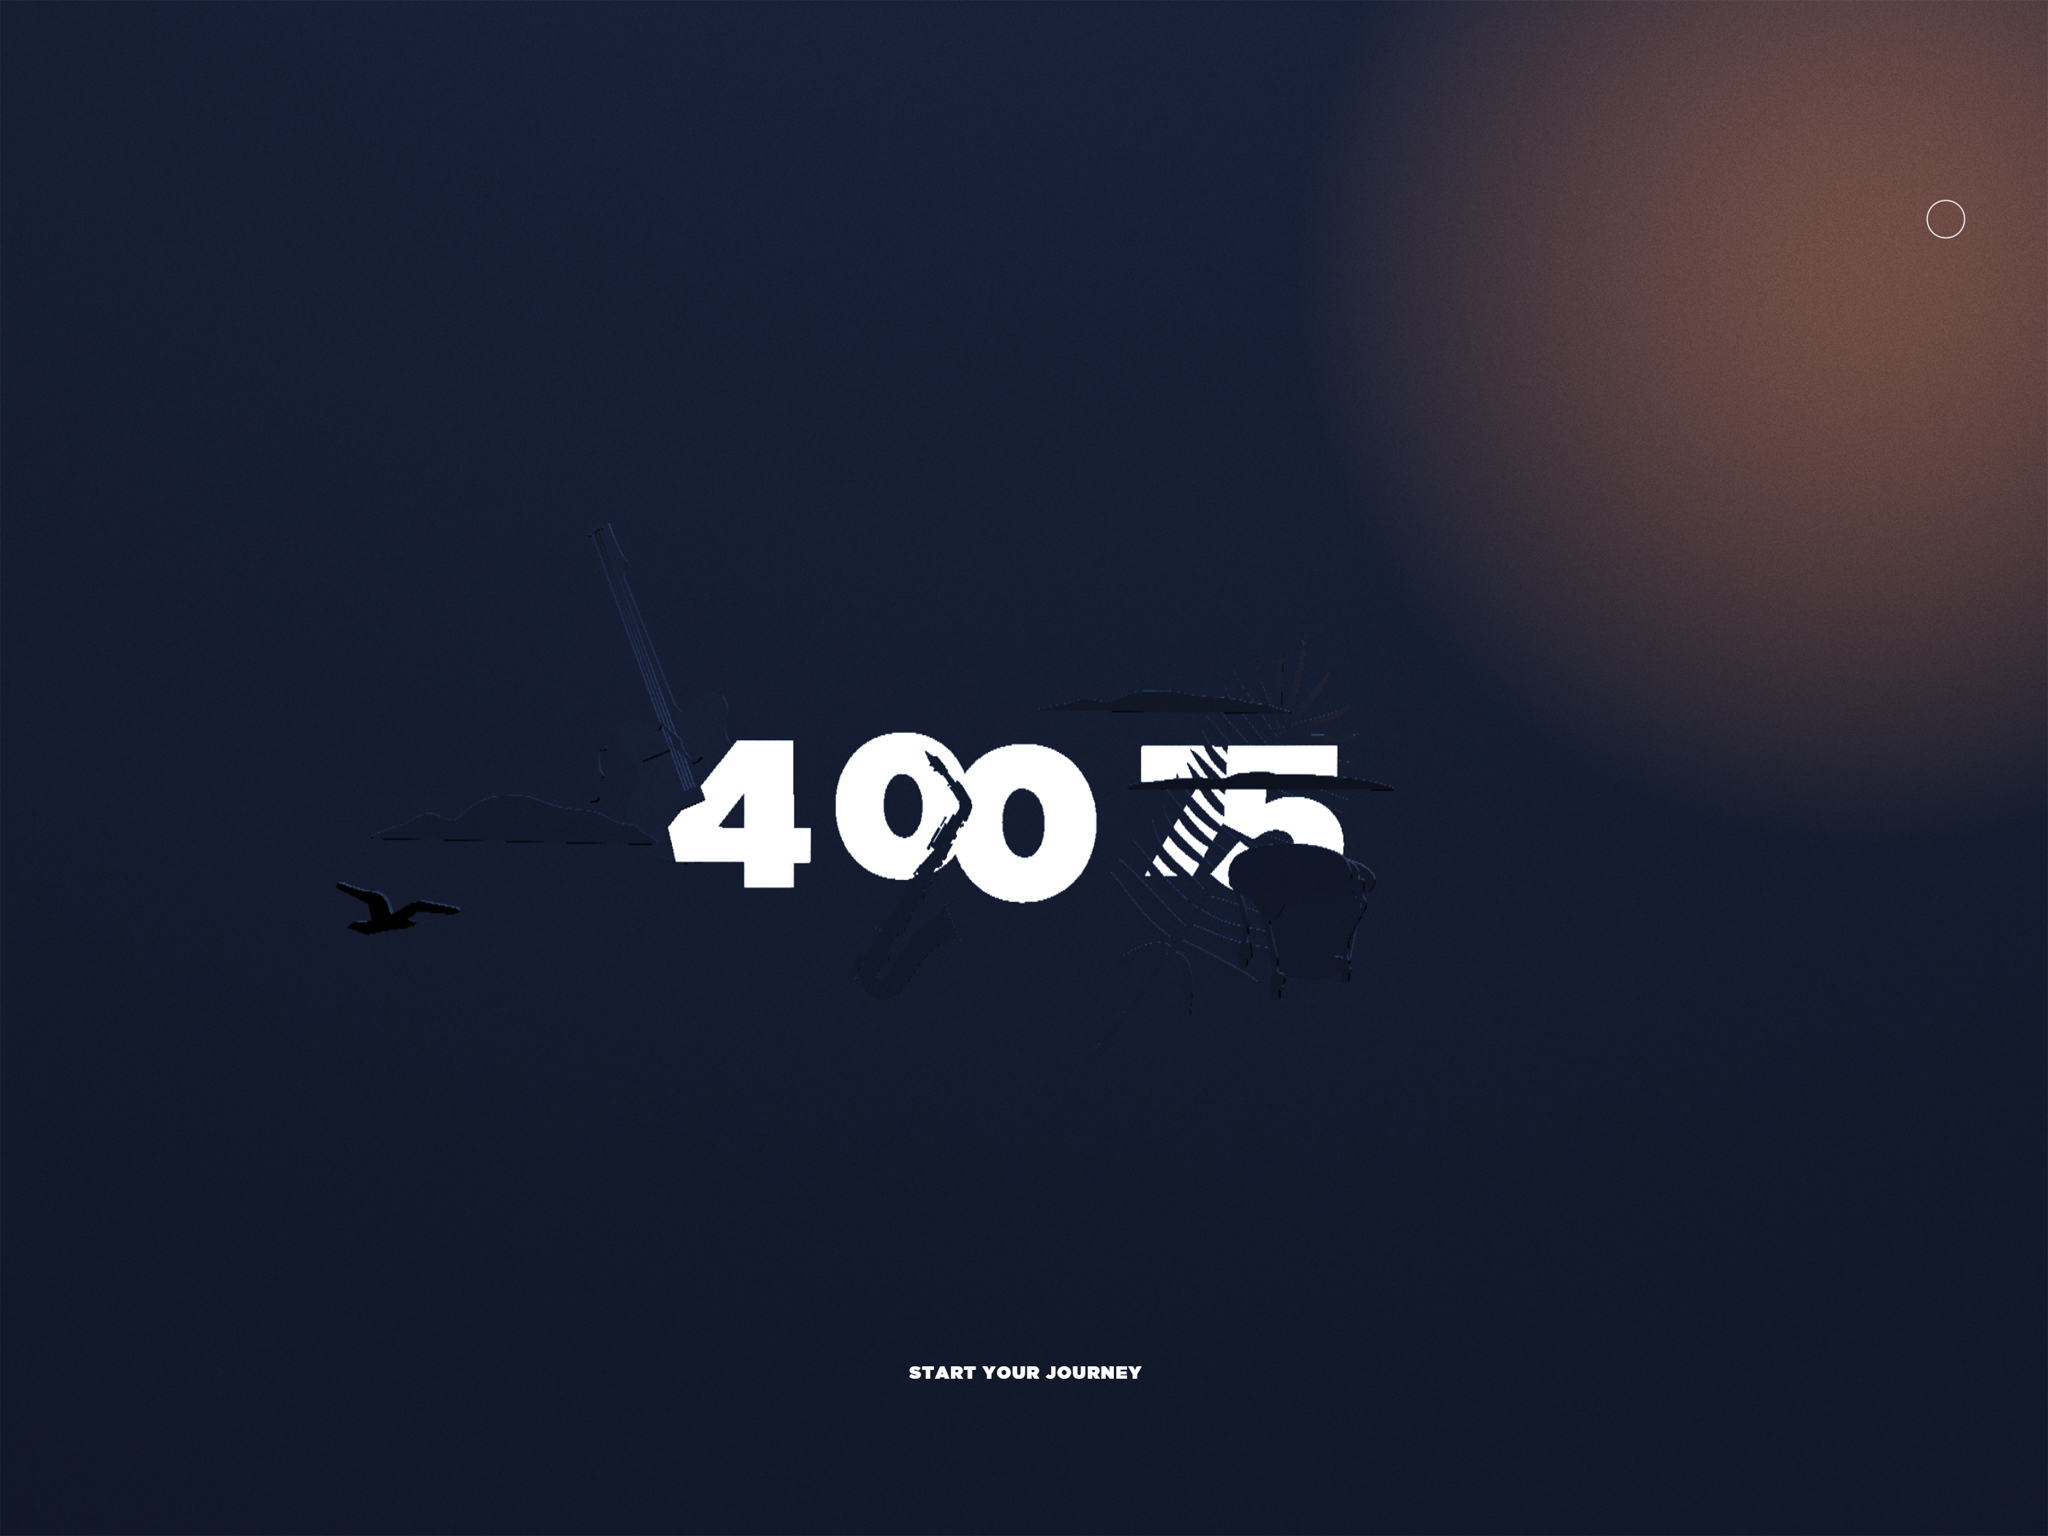 40075 – A musical experience